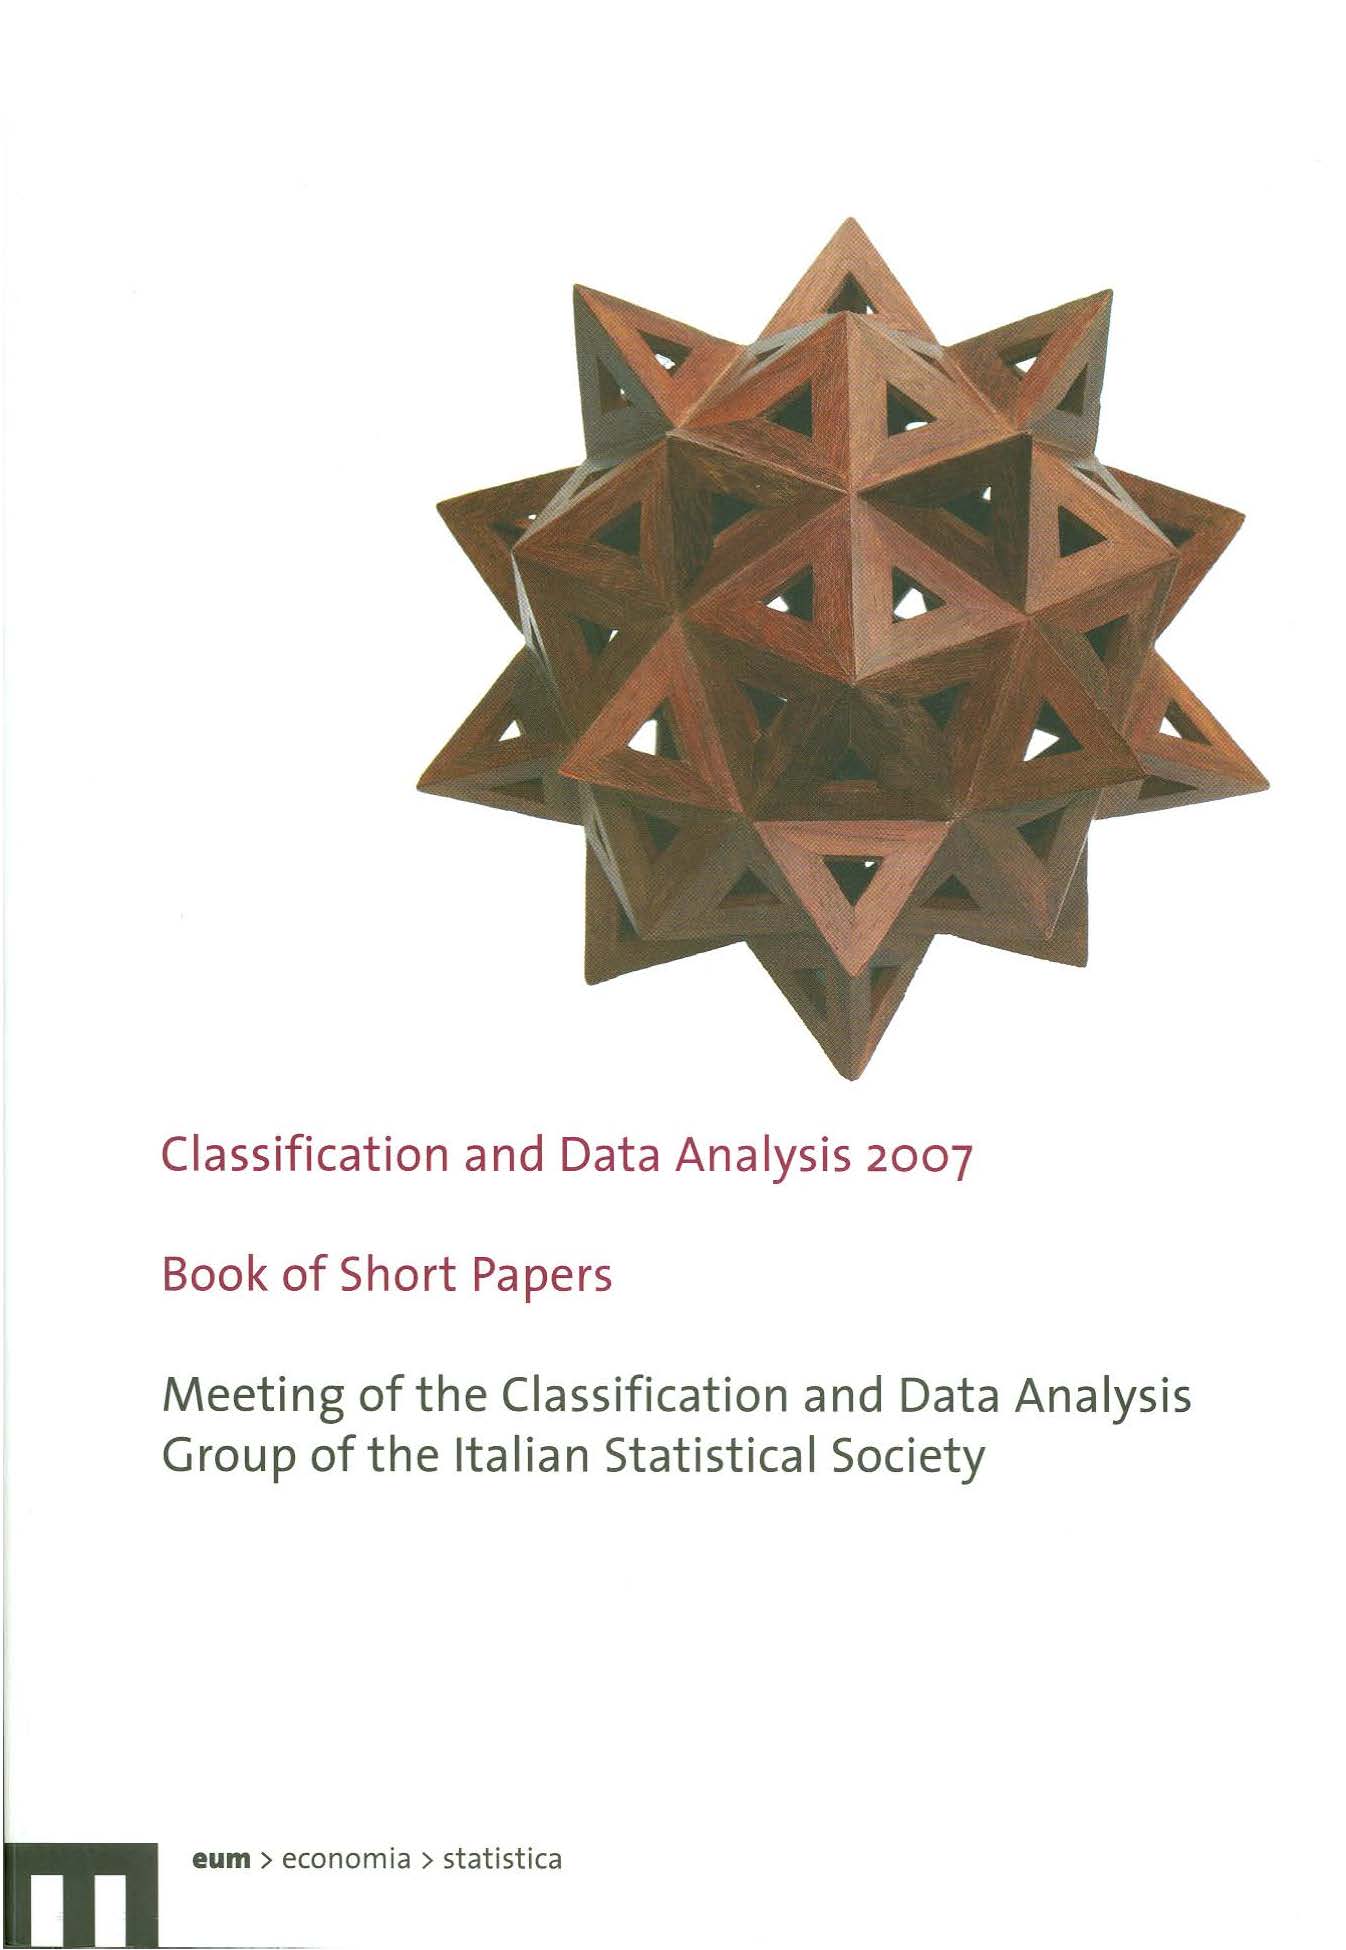 Classification and Data Analysis 2007